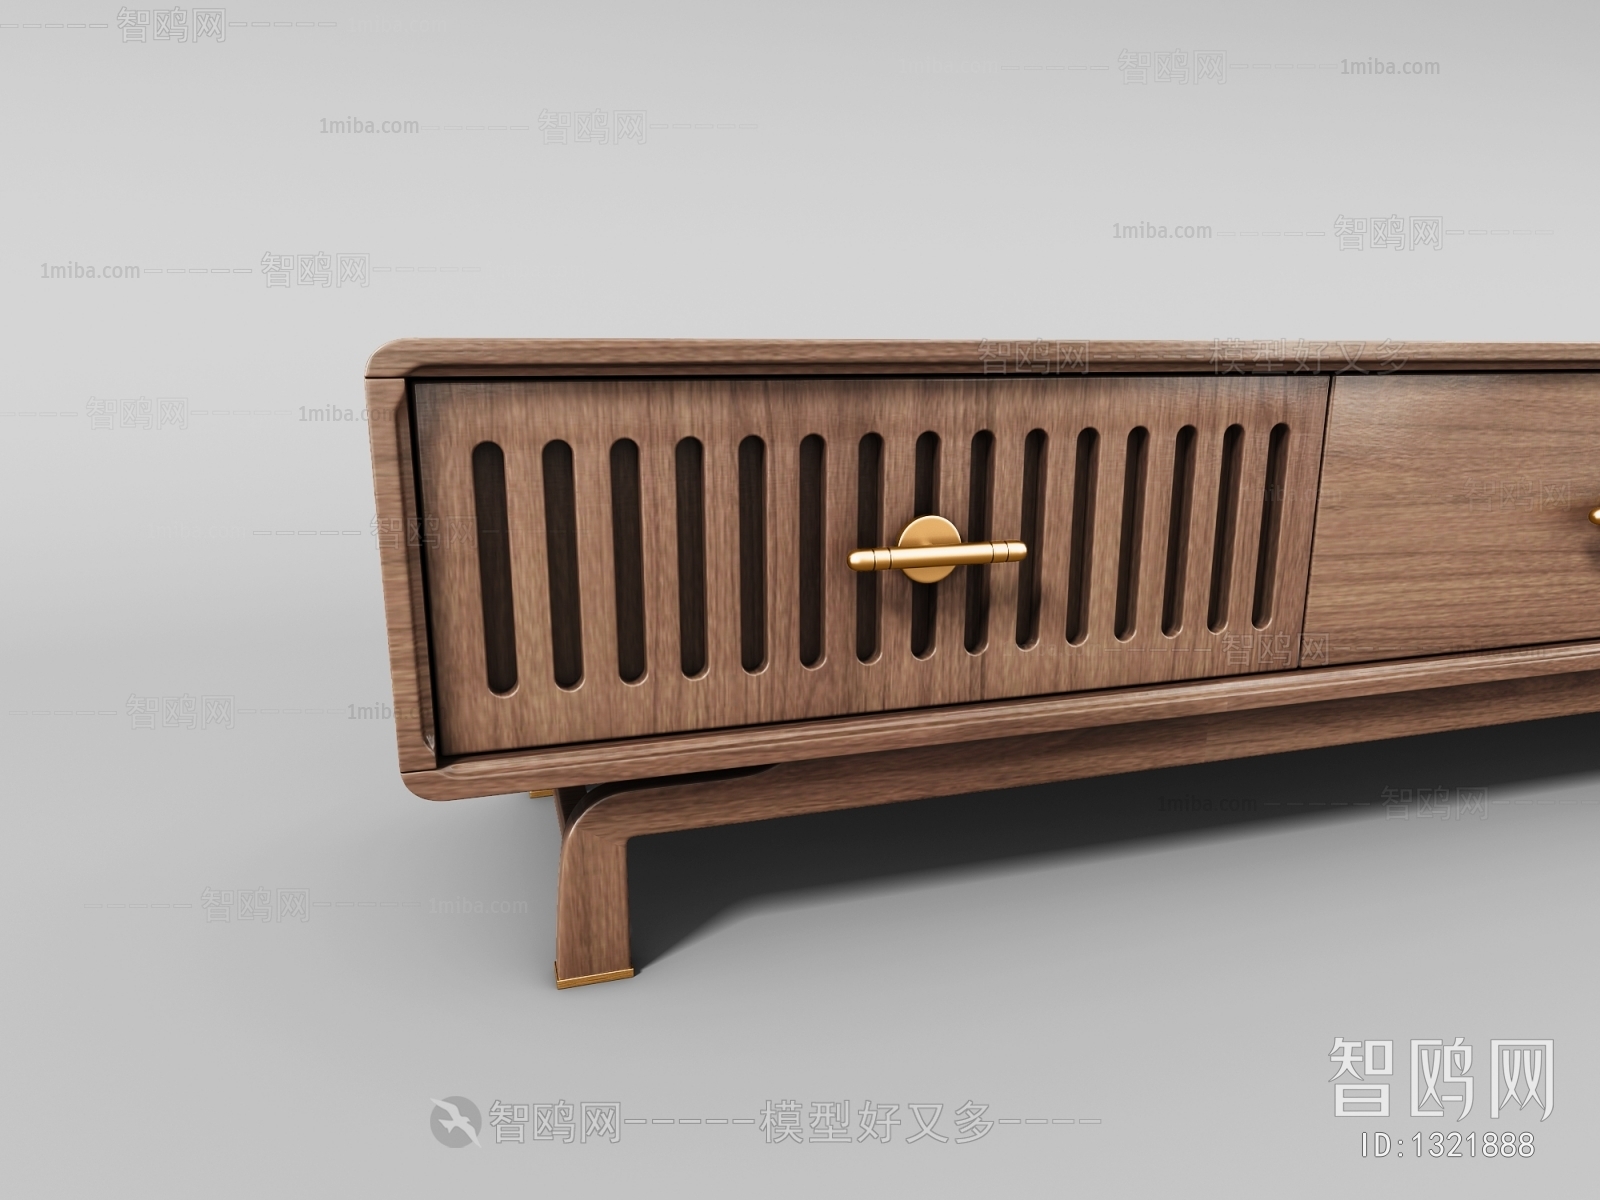 Chinese Style TV Cabinet